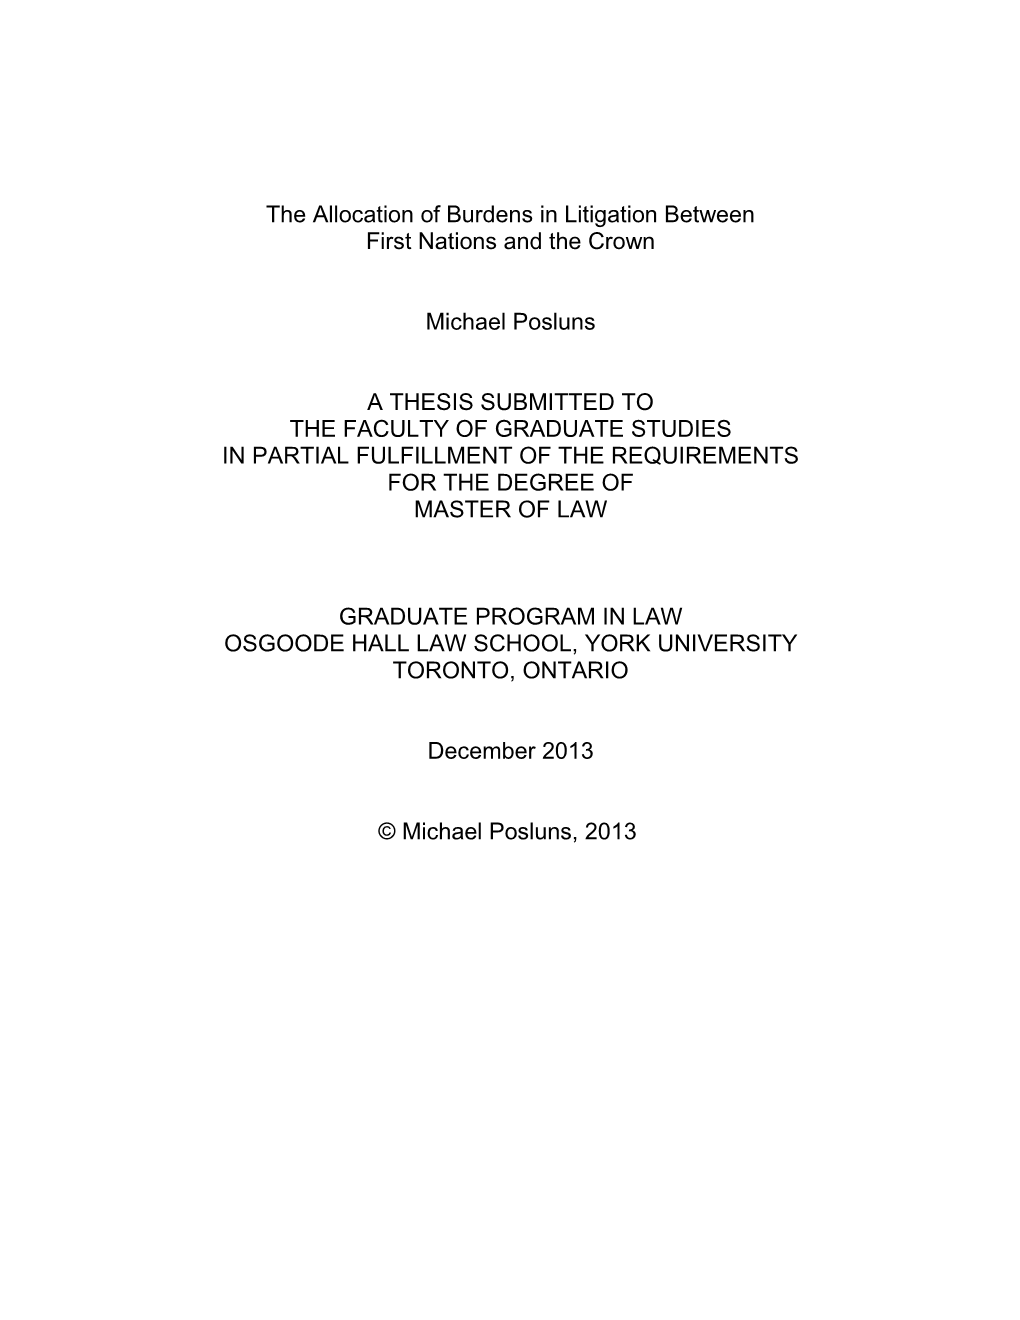 The Allocation of Burdens in Litigation Between First Nations and the Crown Michael Posluns a THESIS SUBMITTED to the FACULTY O